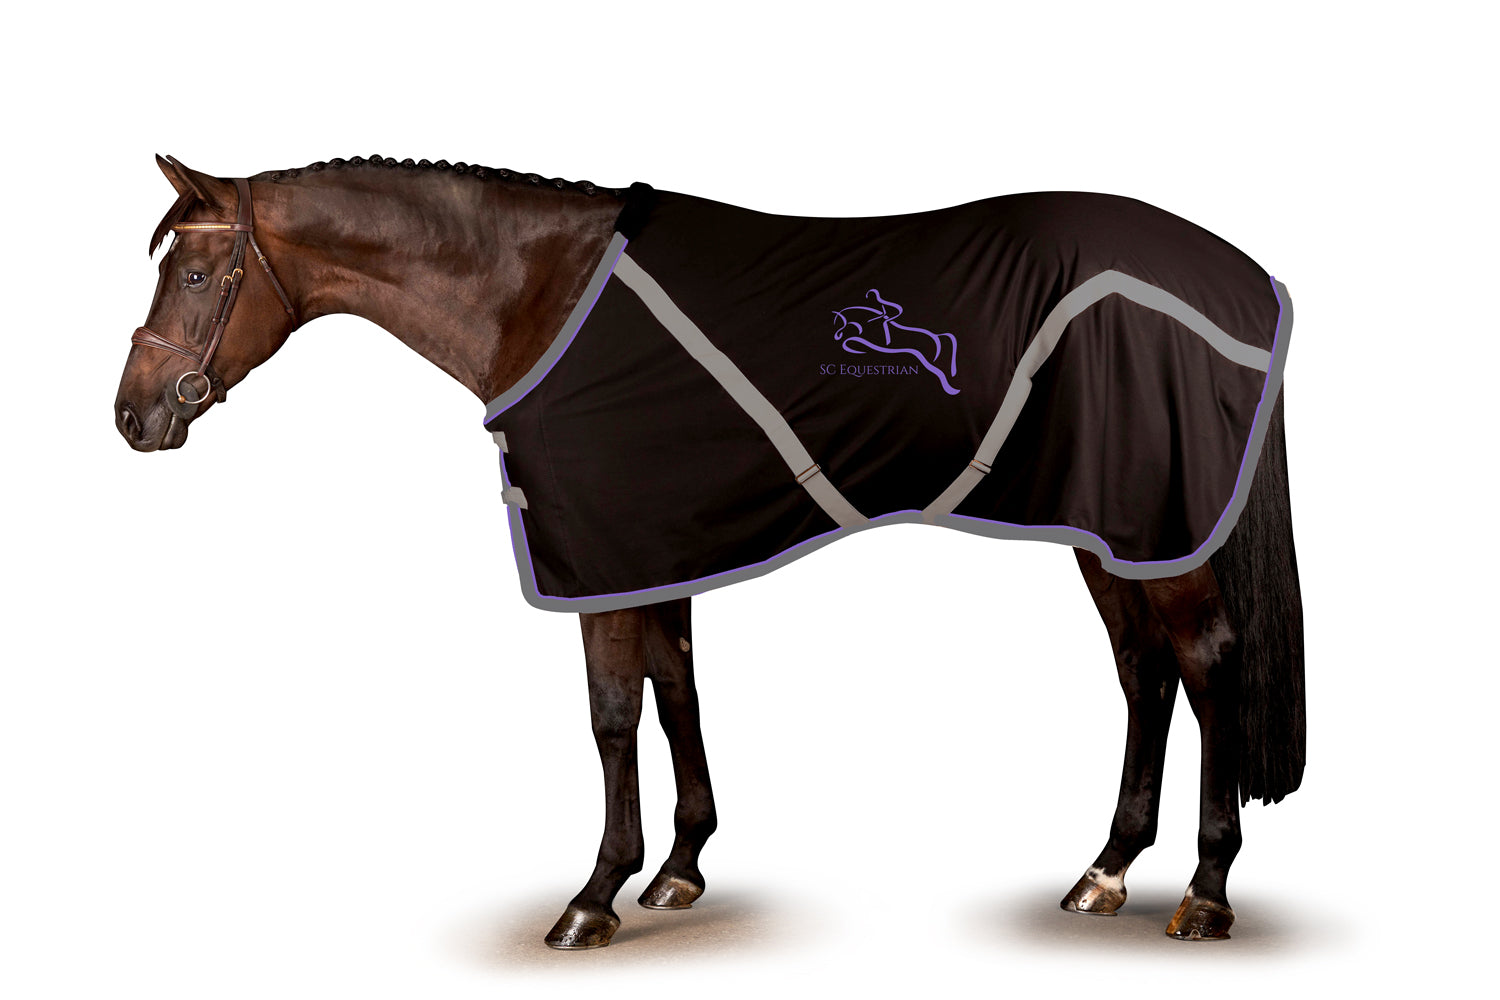 SC Equestrian Stable Sheet